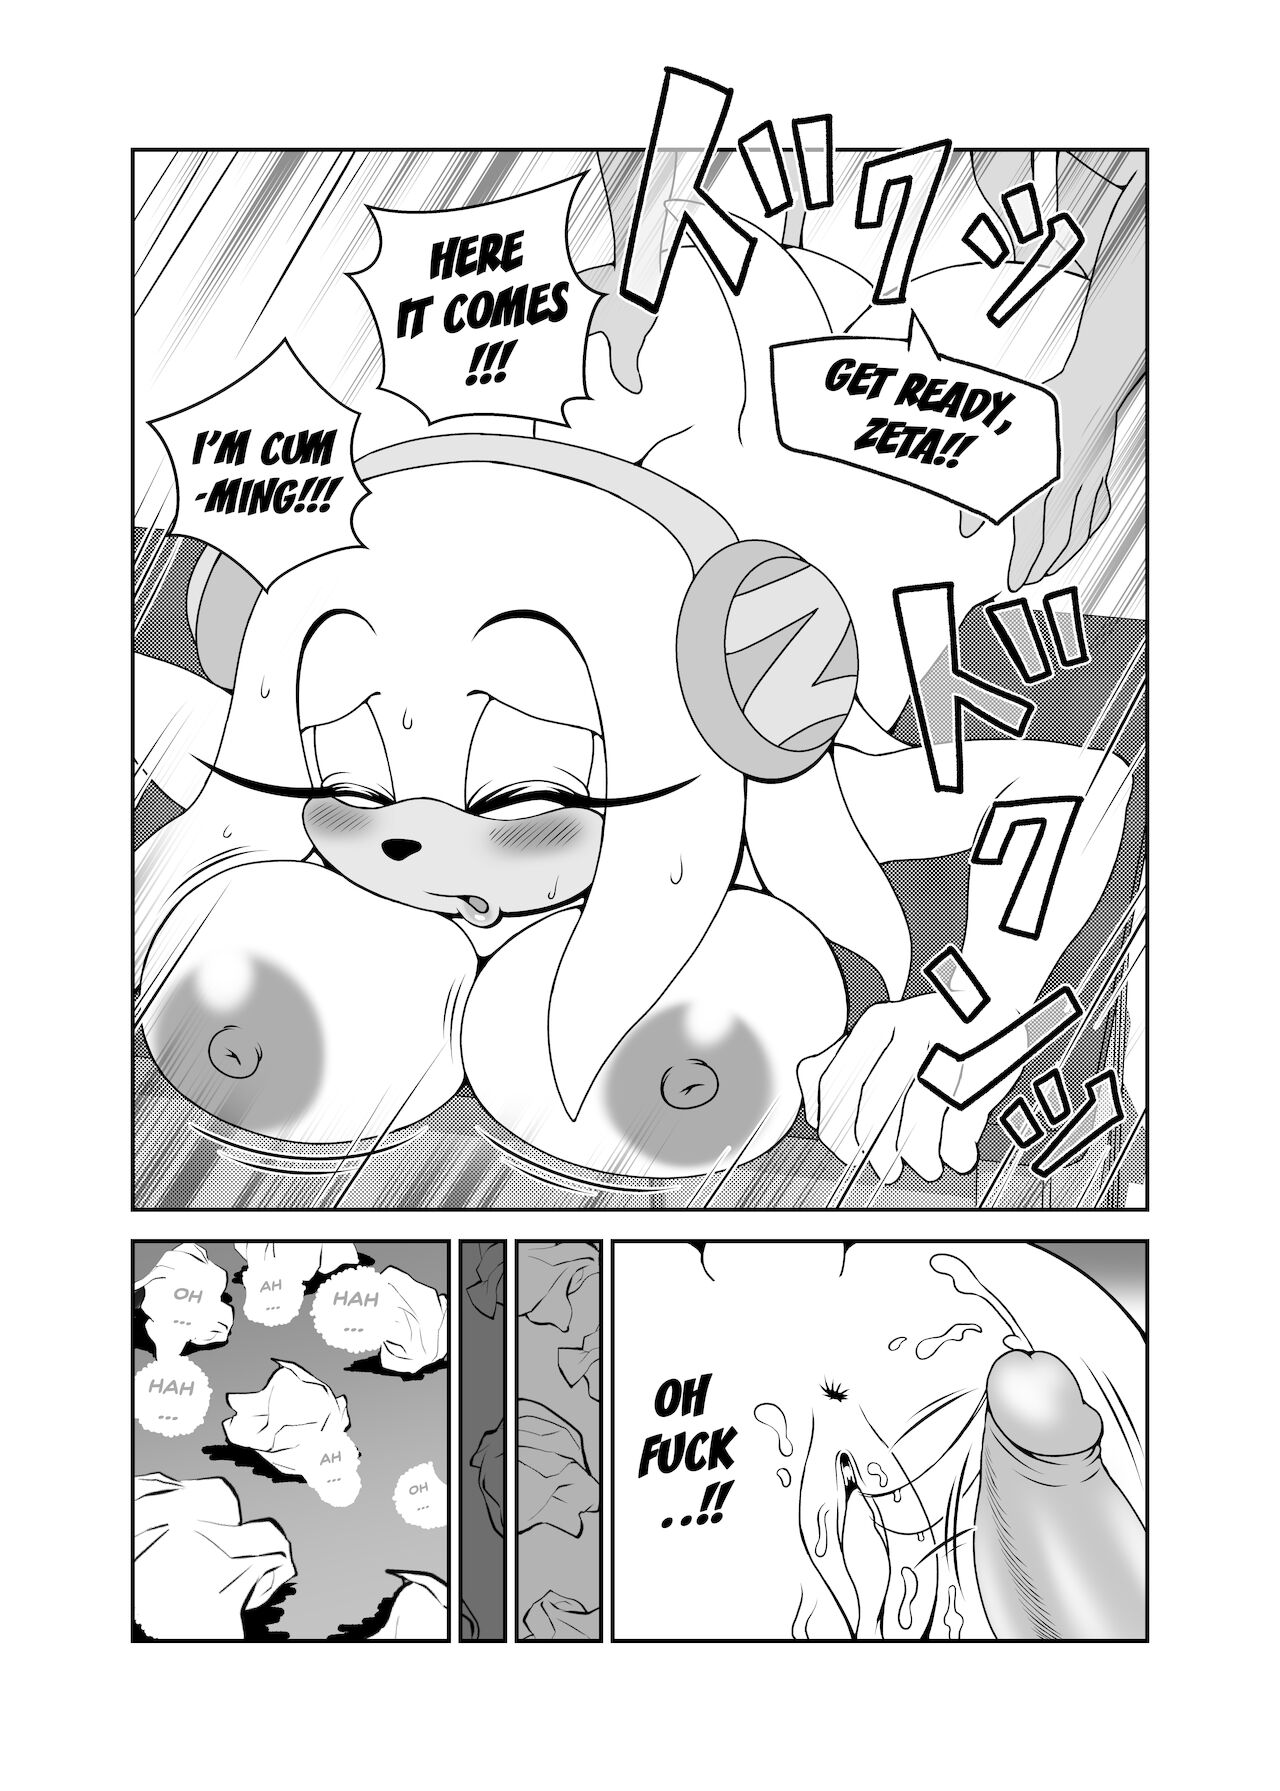 Canned Furry Gaiden 4 - Page 4 - HentaiRox